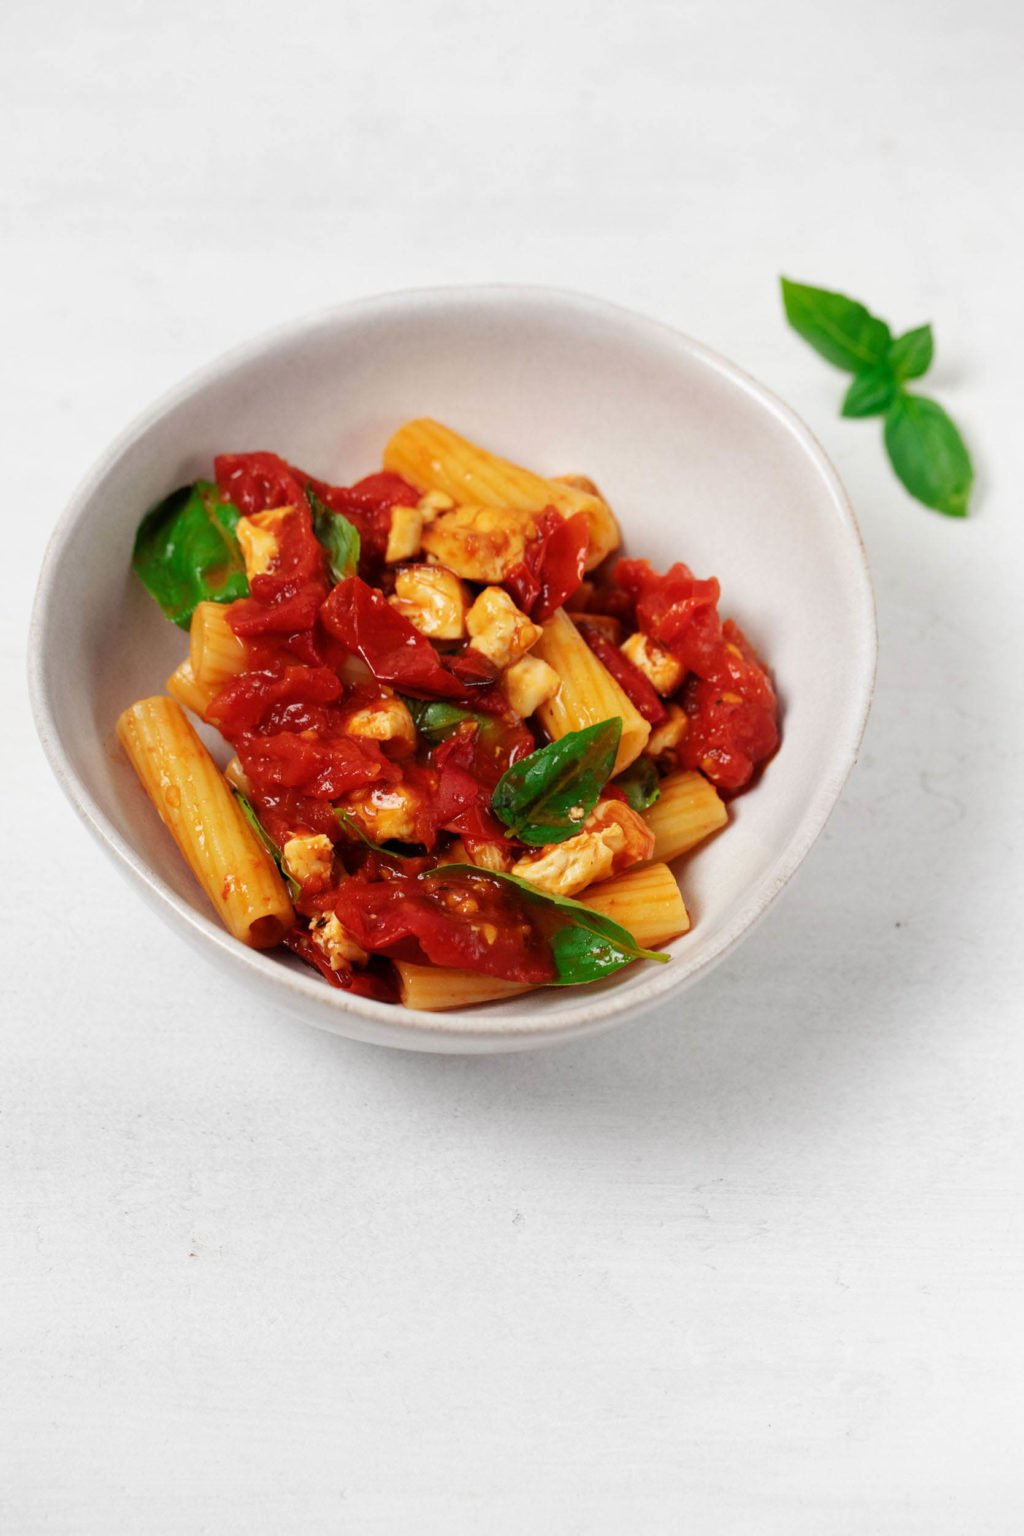 A white bowl of pasta with tomatoes and torn fresh basil leaves. It rests on a white surface.